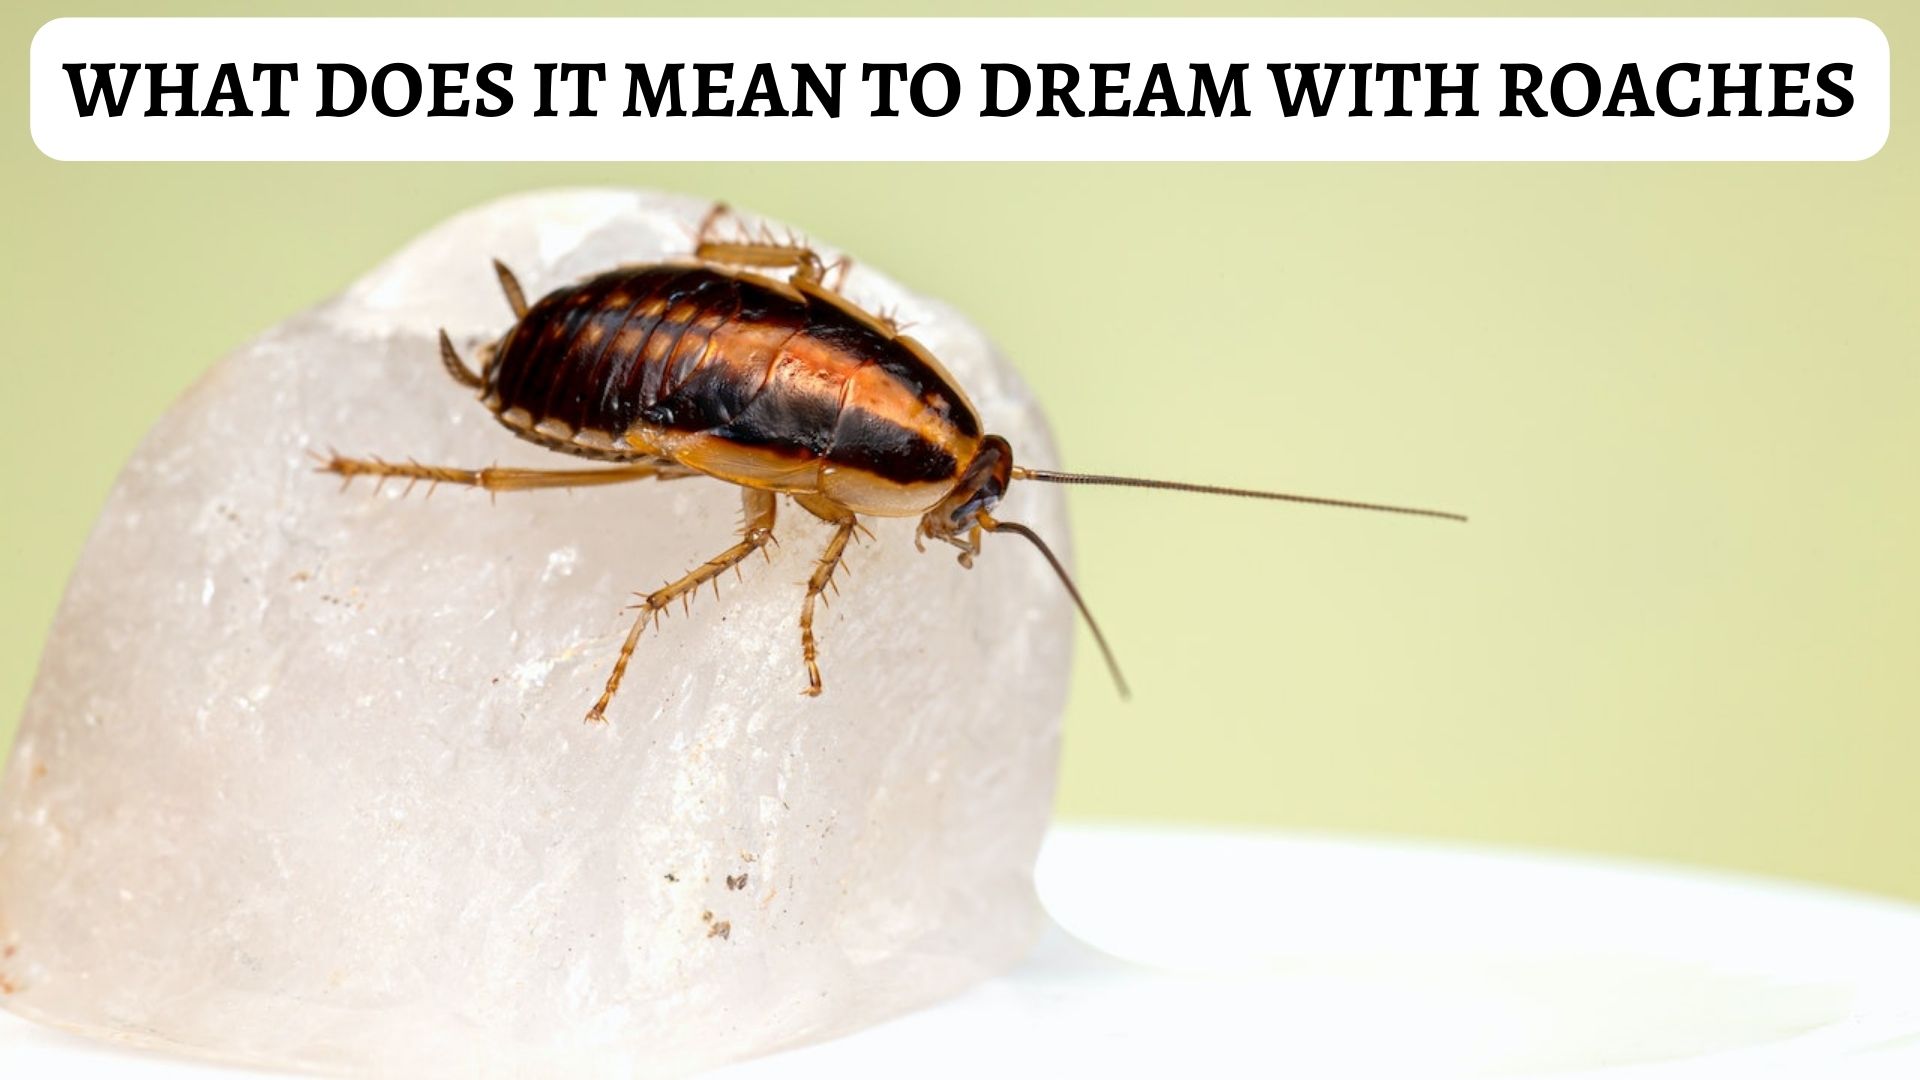 What Does It Mean To Dream With Roaches?